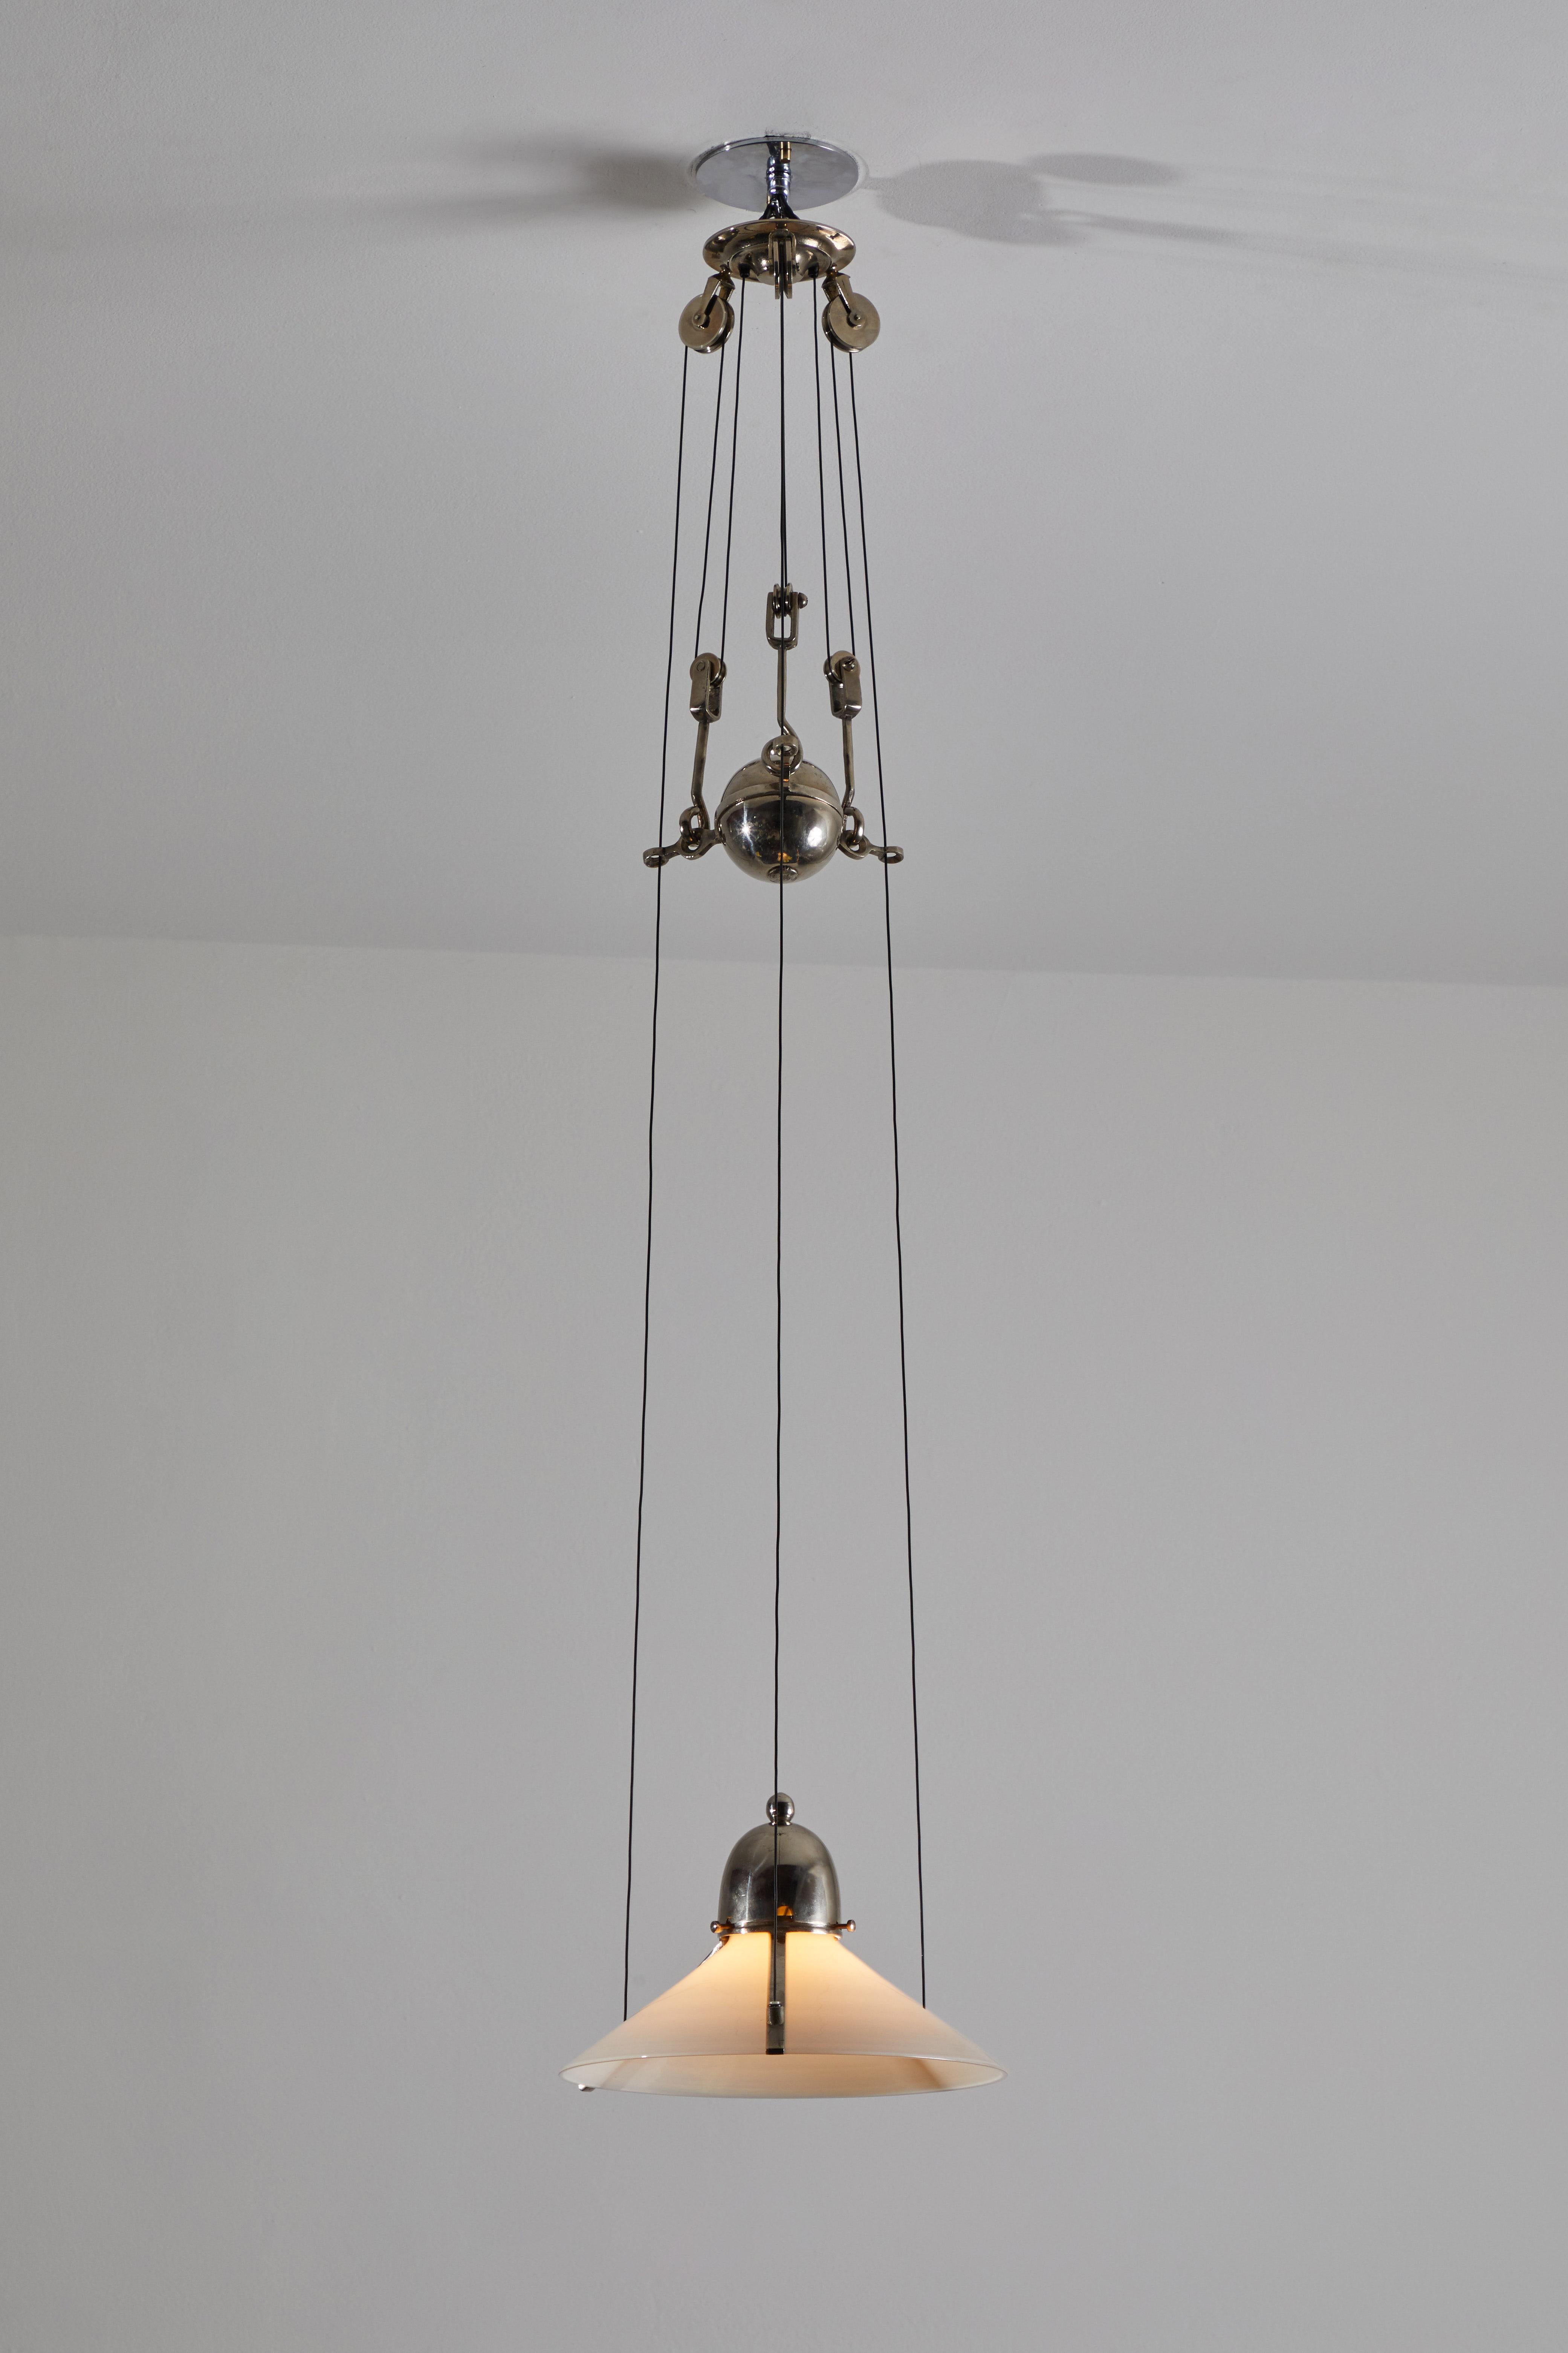 Vienna secession suspension light. Designed and manufactured in Austria as part of the Vienna Secession period circa 1920s. Opaline glass, nickel, cord. Rewired for U.S. junction boxes. Light adjust to various heights by way of pulley mechanism.